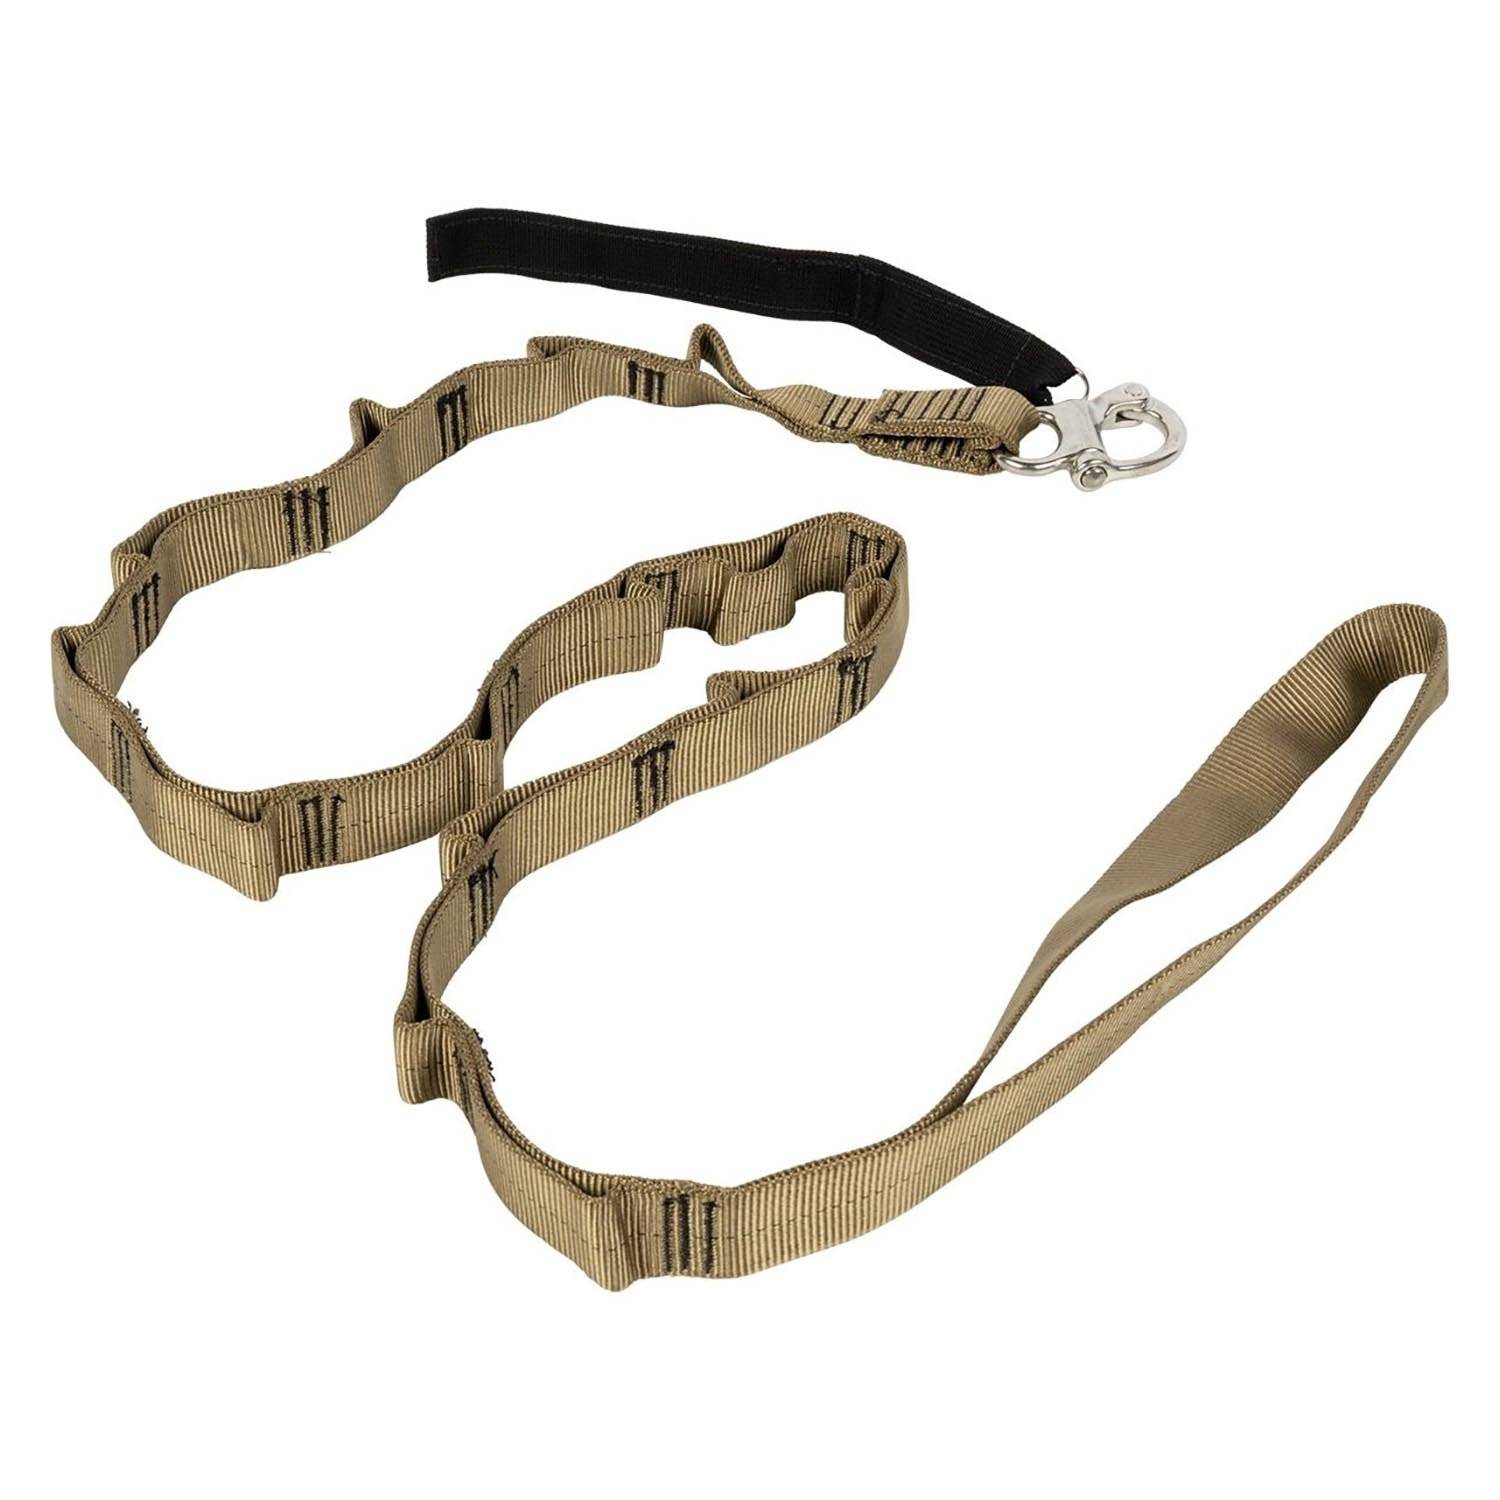 North American Rescue RAT Strap (Rescue Assault Tether)